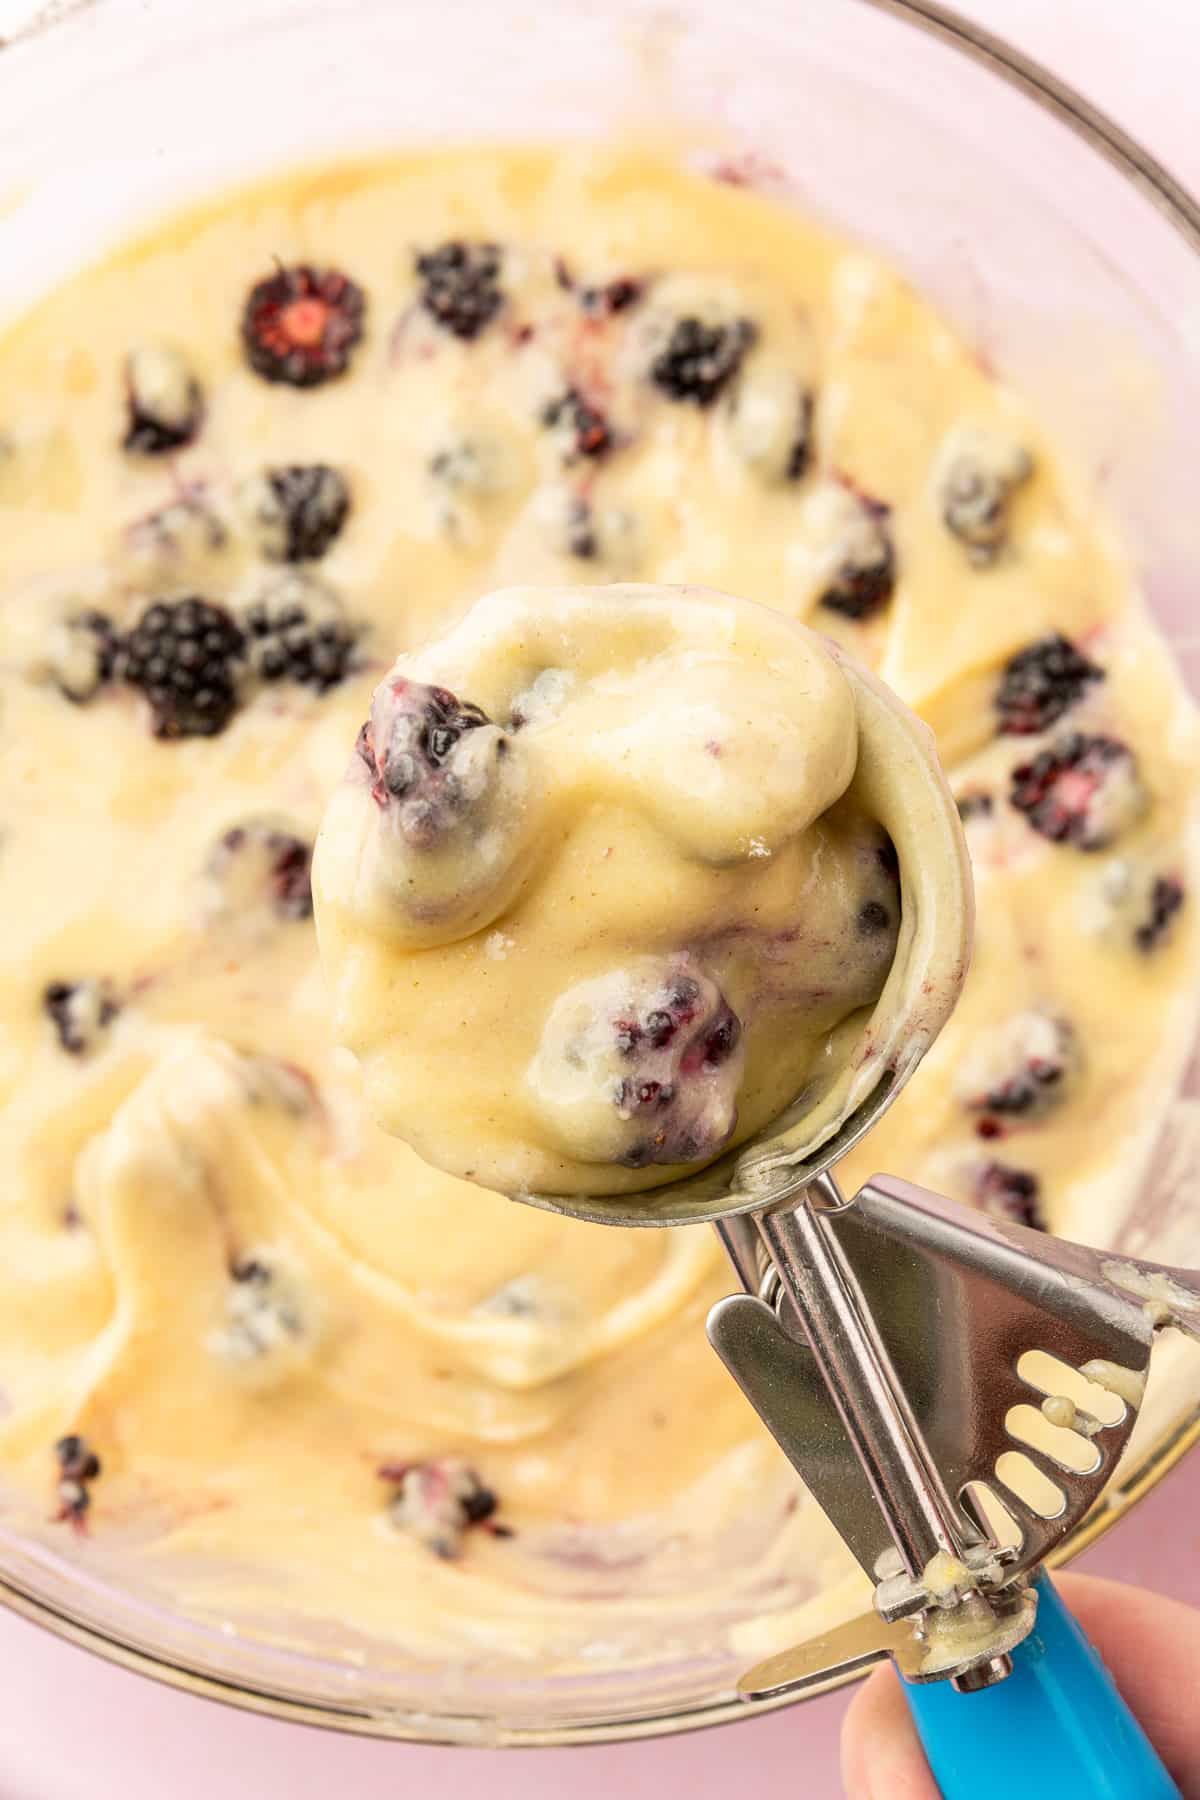 A closeup of a ice cream scoop filled with gluten-free blackberry muffin batter over a whole of more batter.